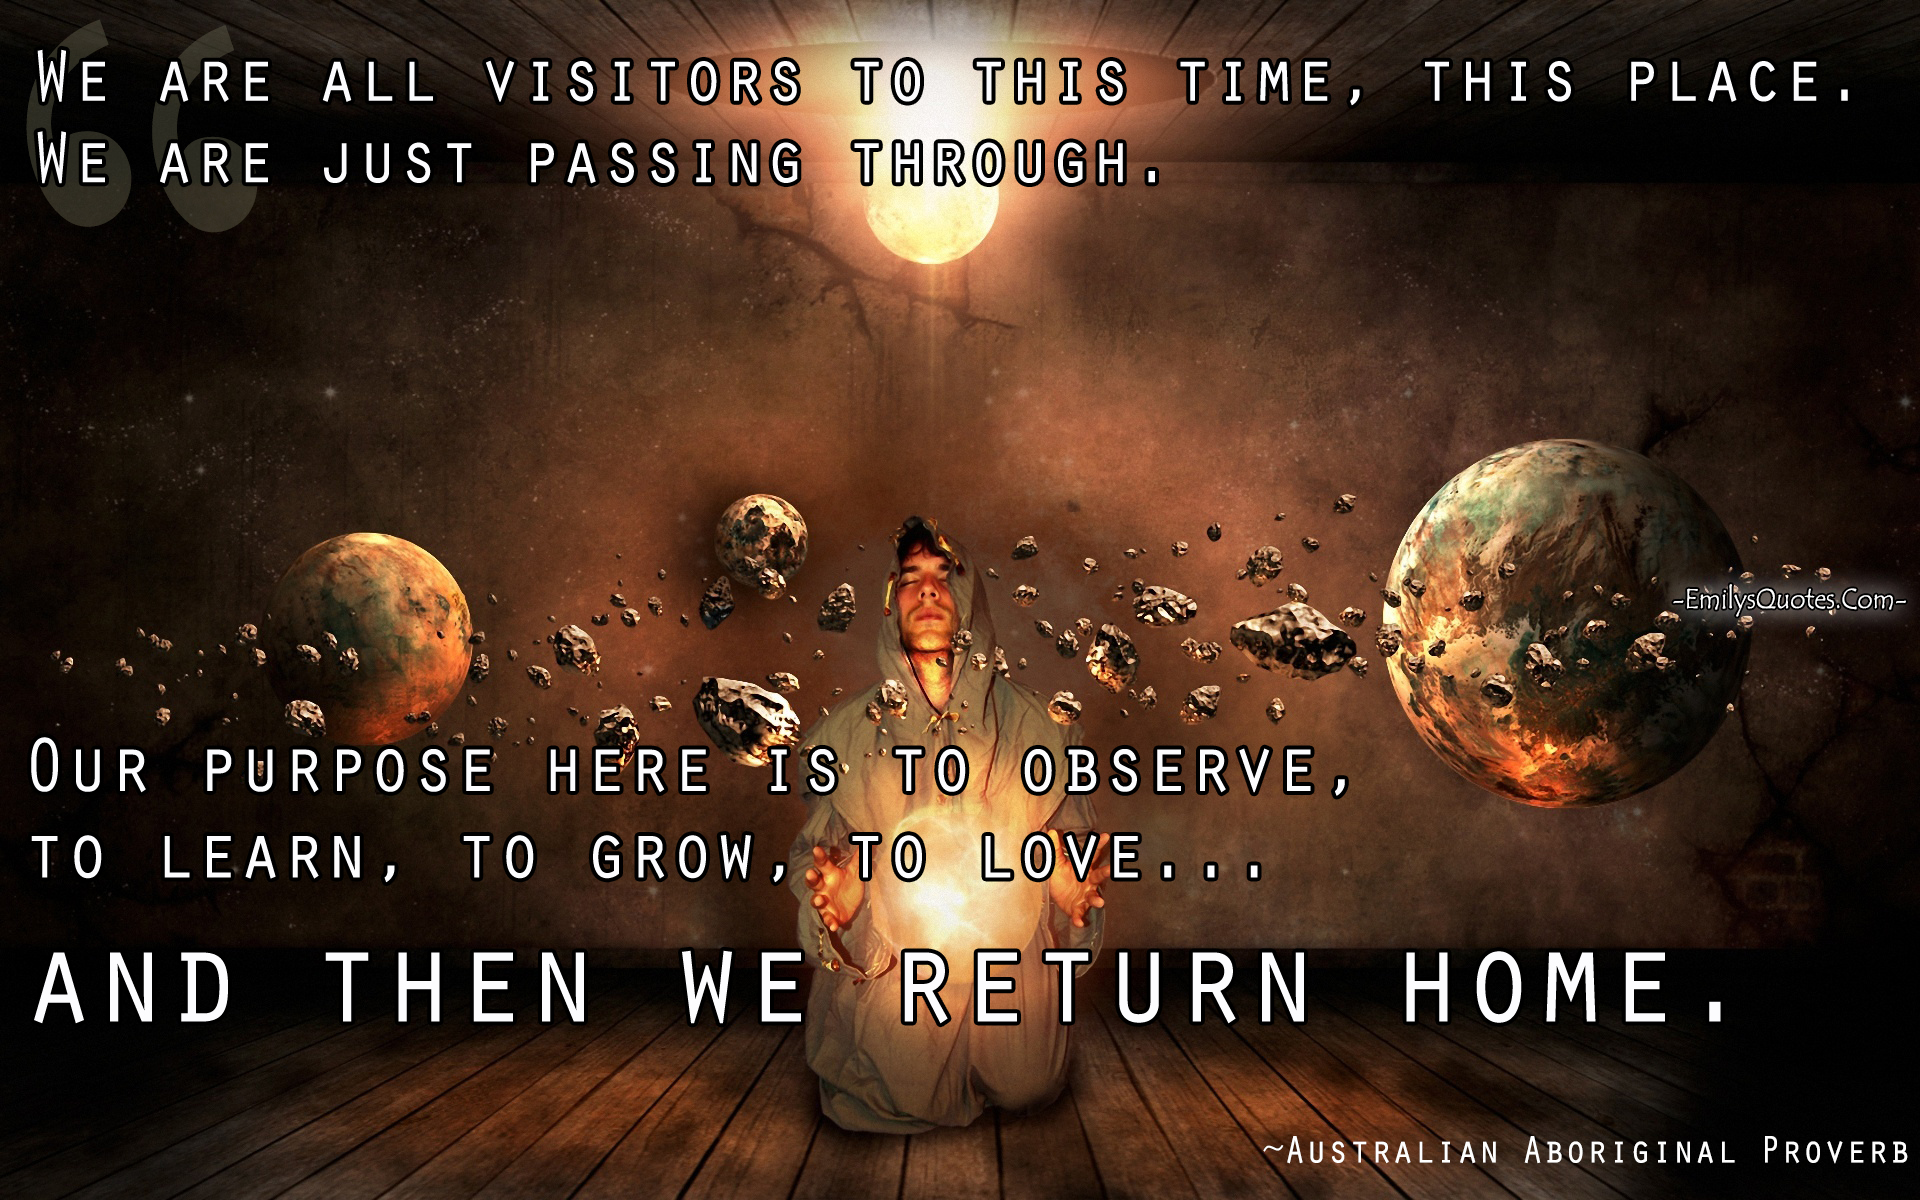 We are all visitors to this time, this place. We are just passing through. Our purpose here is to observe, to learn, to grow, to love… and then we return home